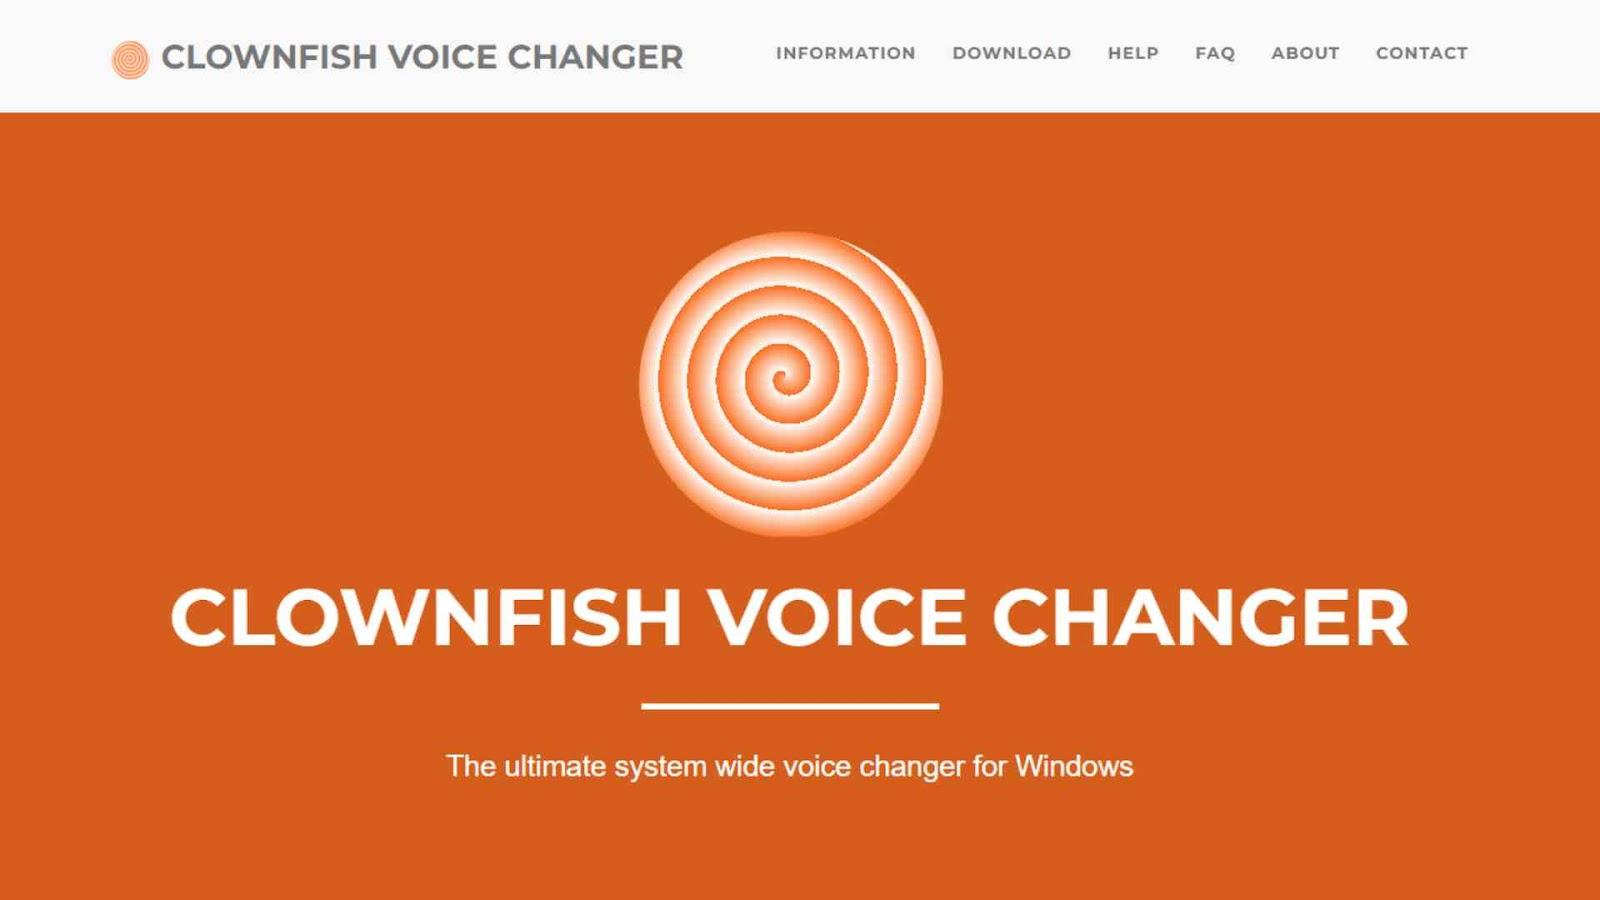 What is Clownfish Voice Changer